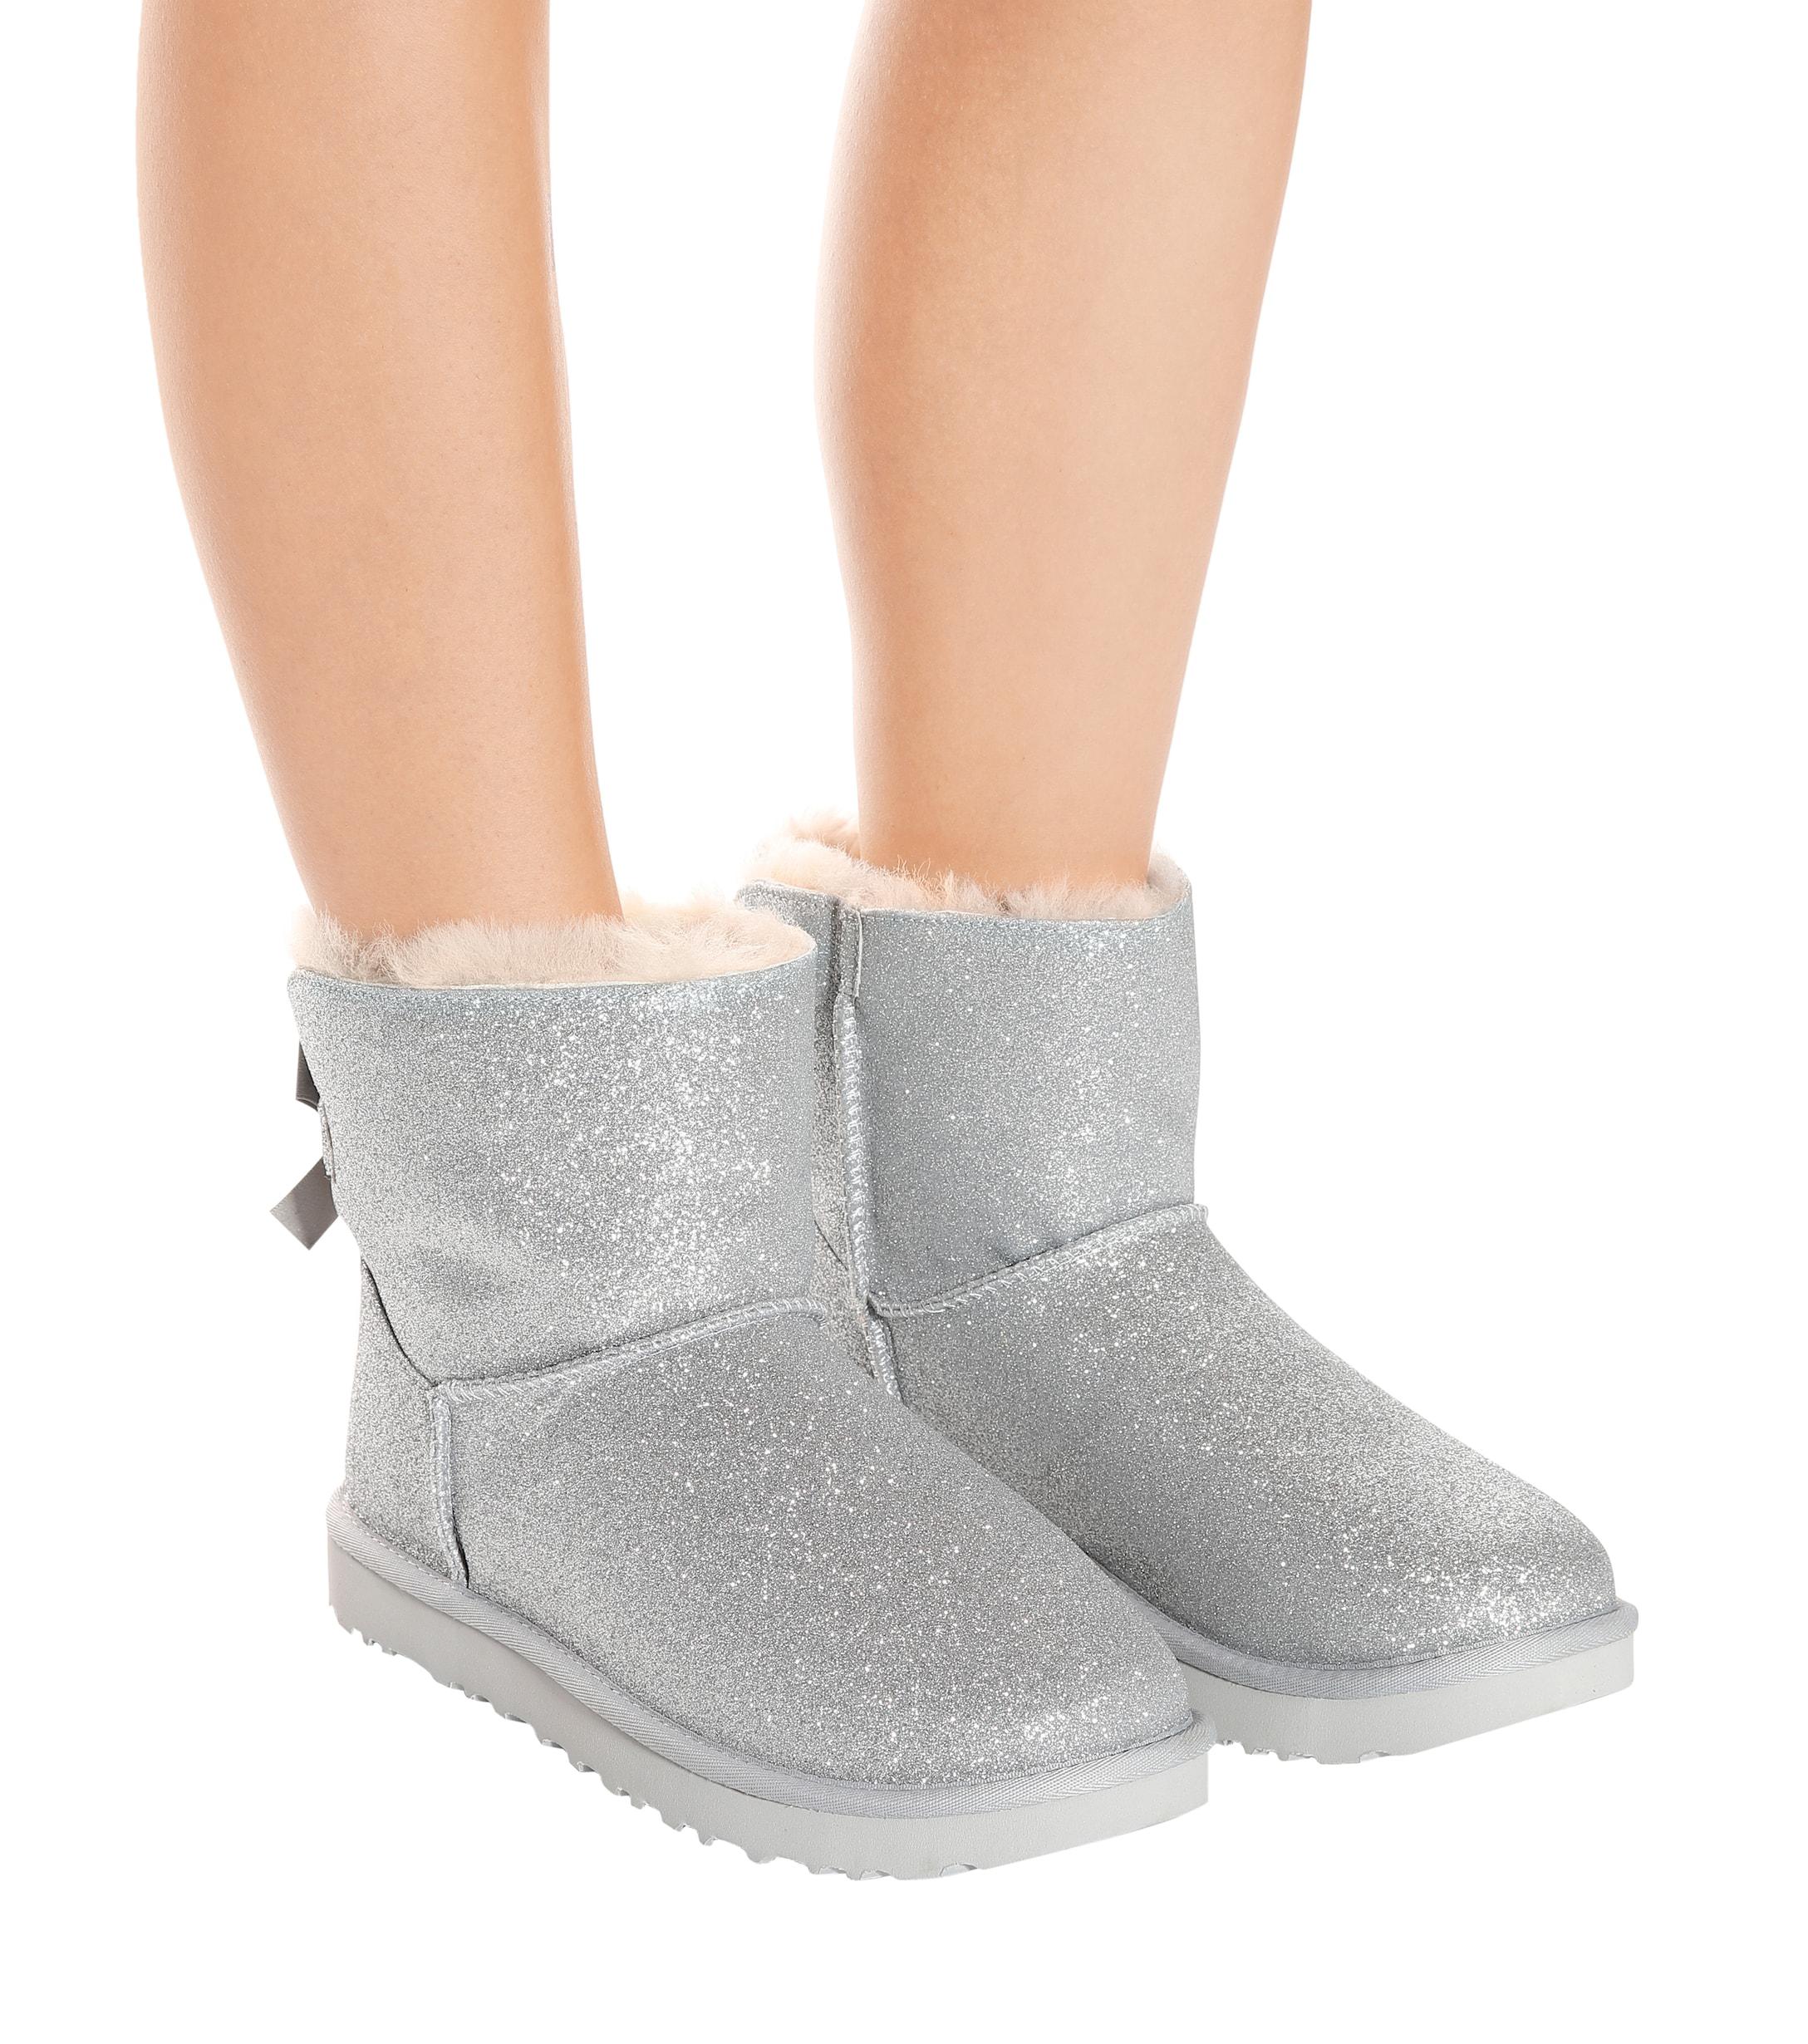 UGG Mini Bailey Bow Glitter And Silver Sheepskin Ankle Boots Women's ...